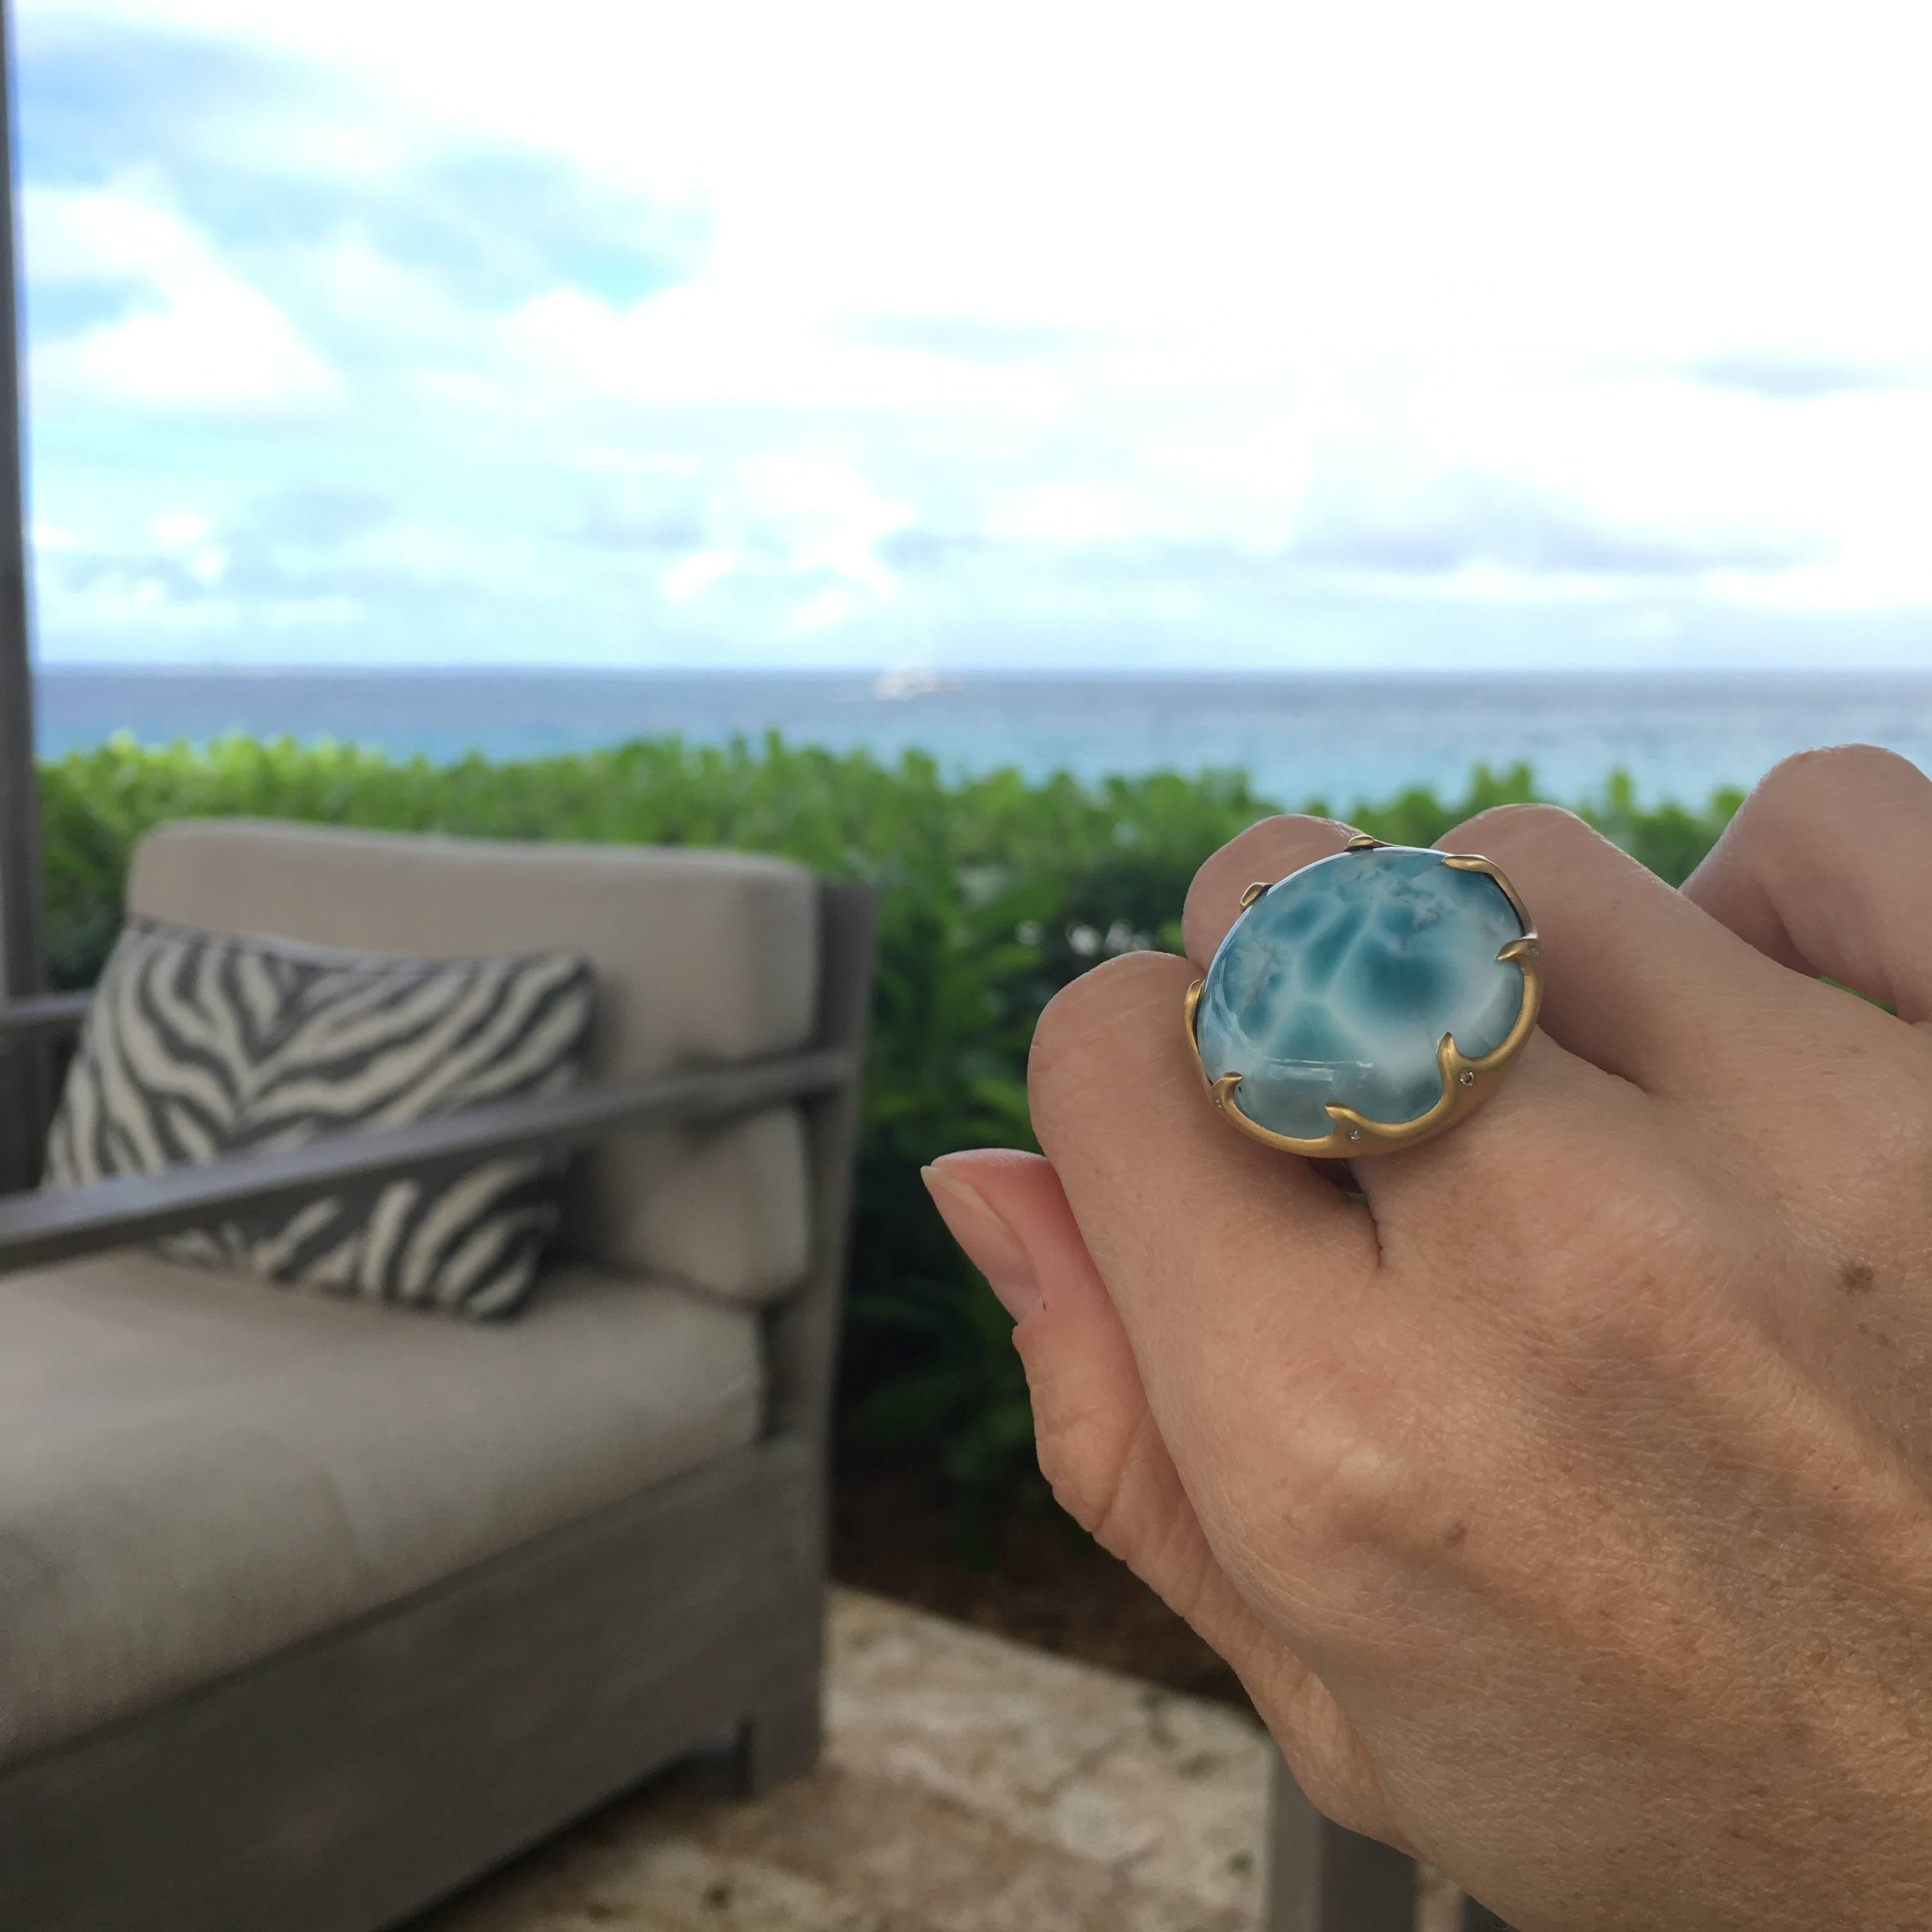 Truly a wow ring, this cabachon round Larimar is a one of a kind beauty.  This Larimar has vibrant blue sky tone to it, with a pattern to it that resembles moving water.  Inspired by the ocean like qualities of the stone (found in only one place in